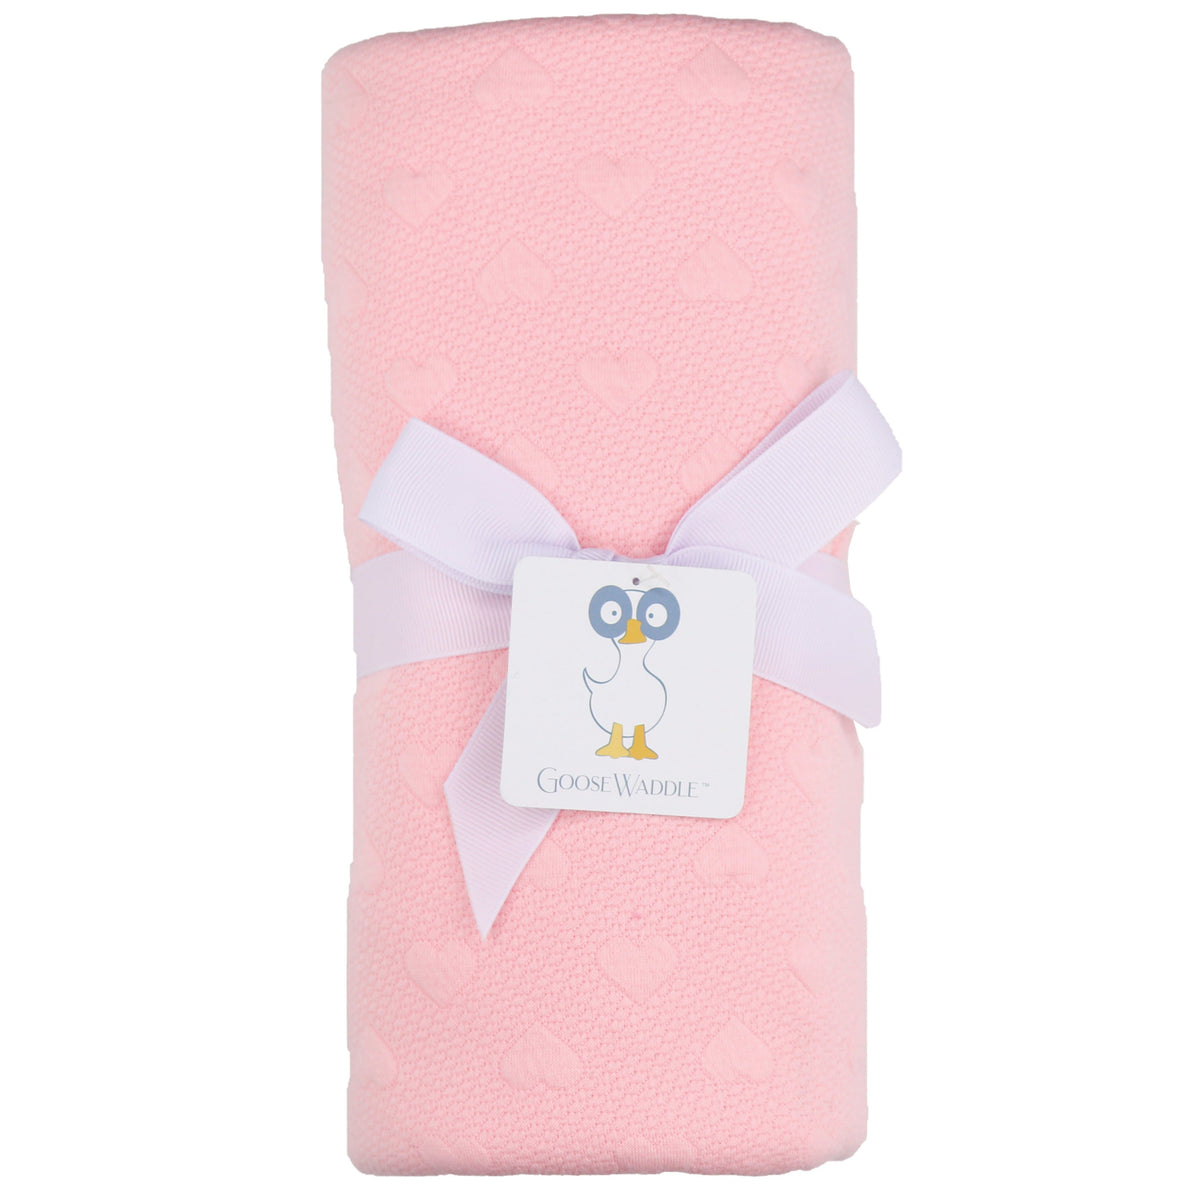 GooseWaddle Pink Knit Baby Blankets